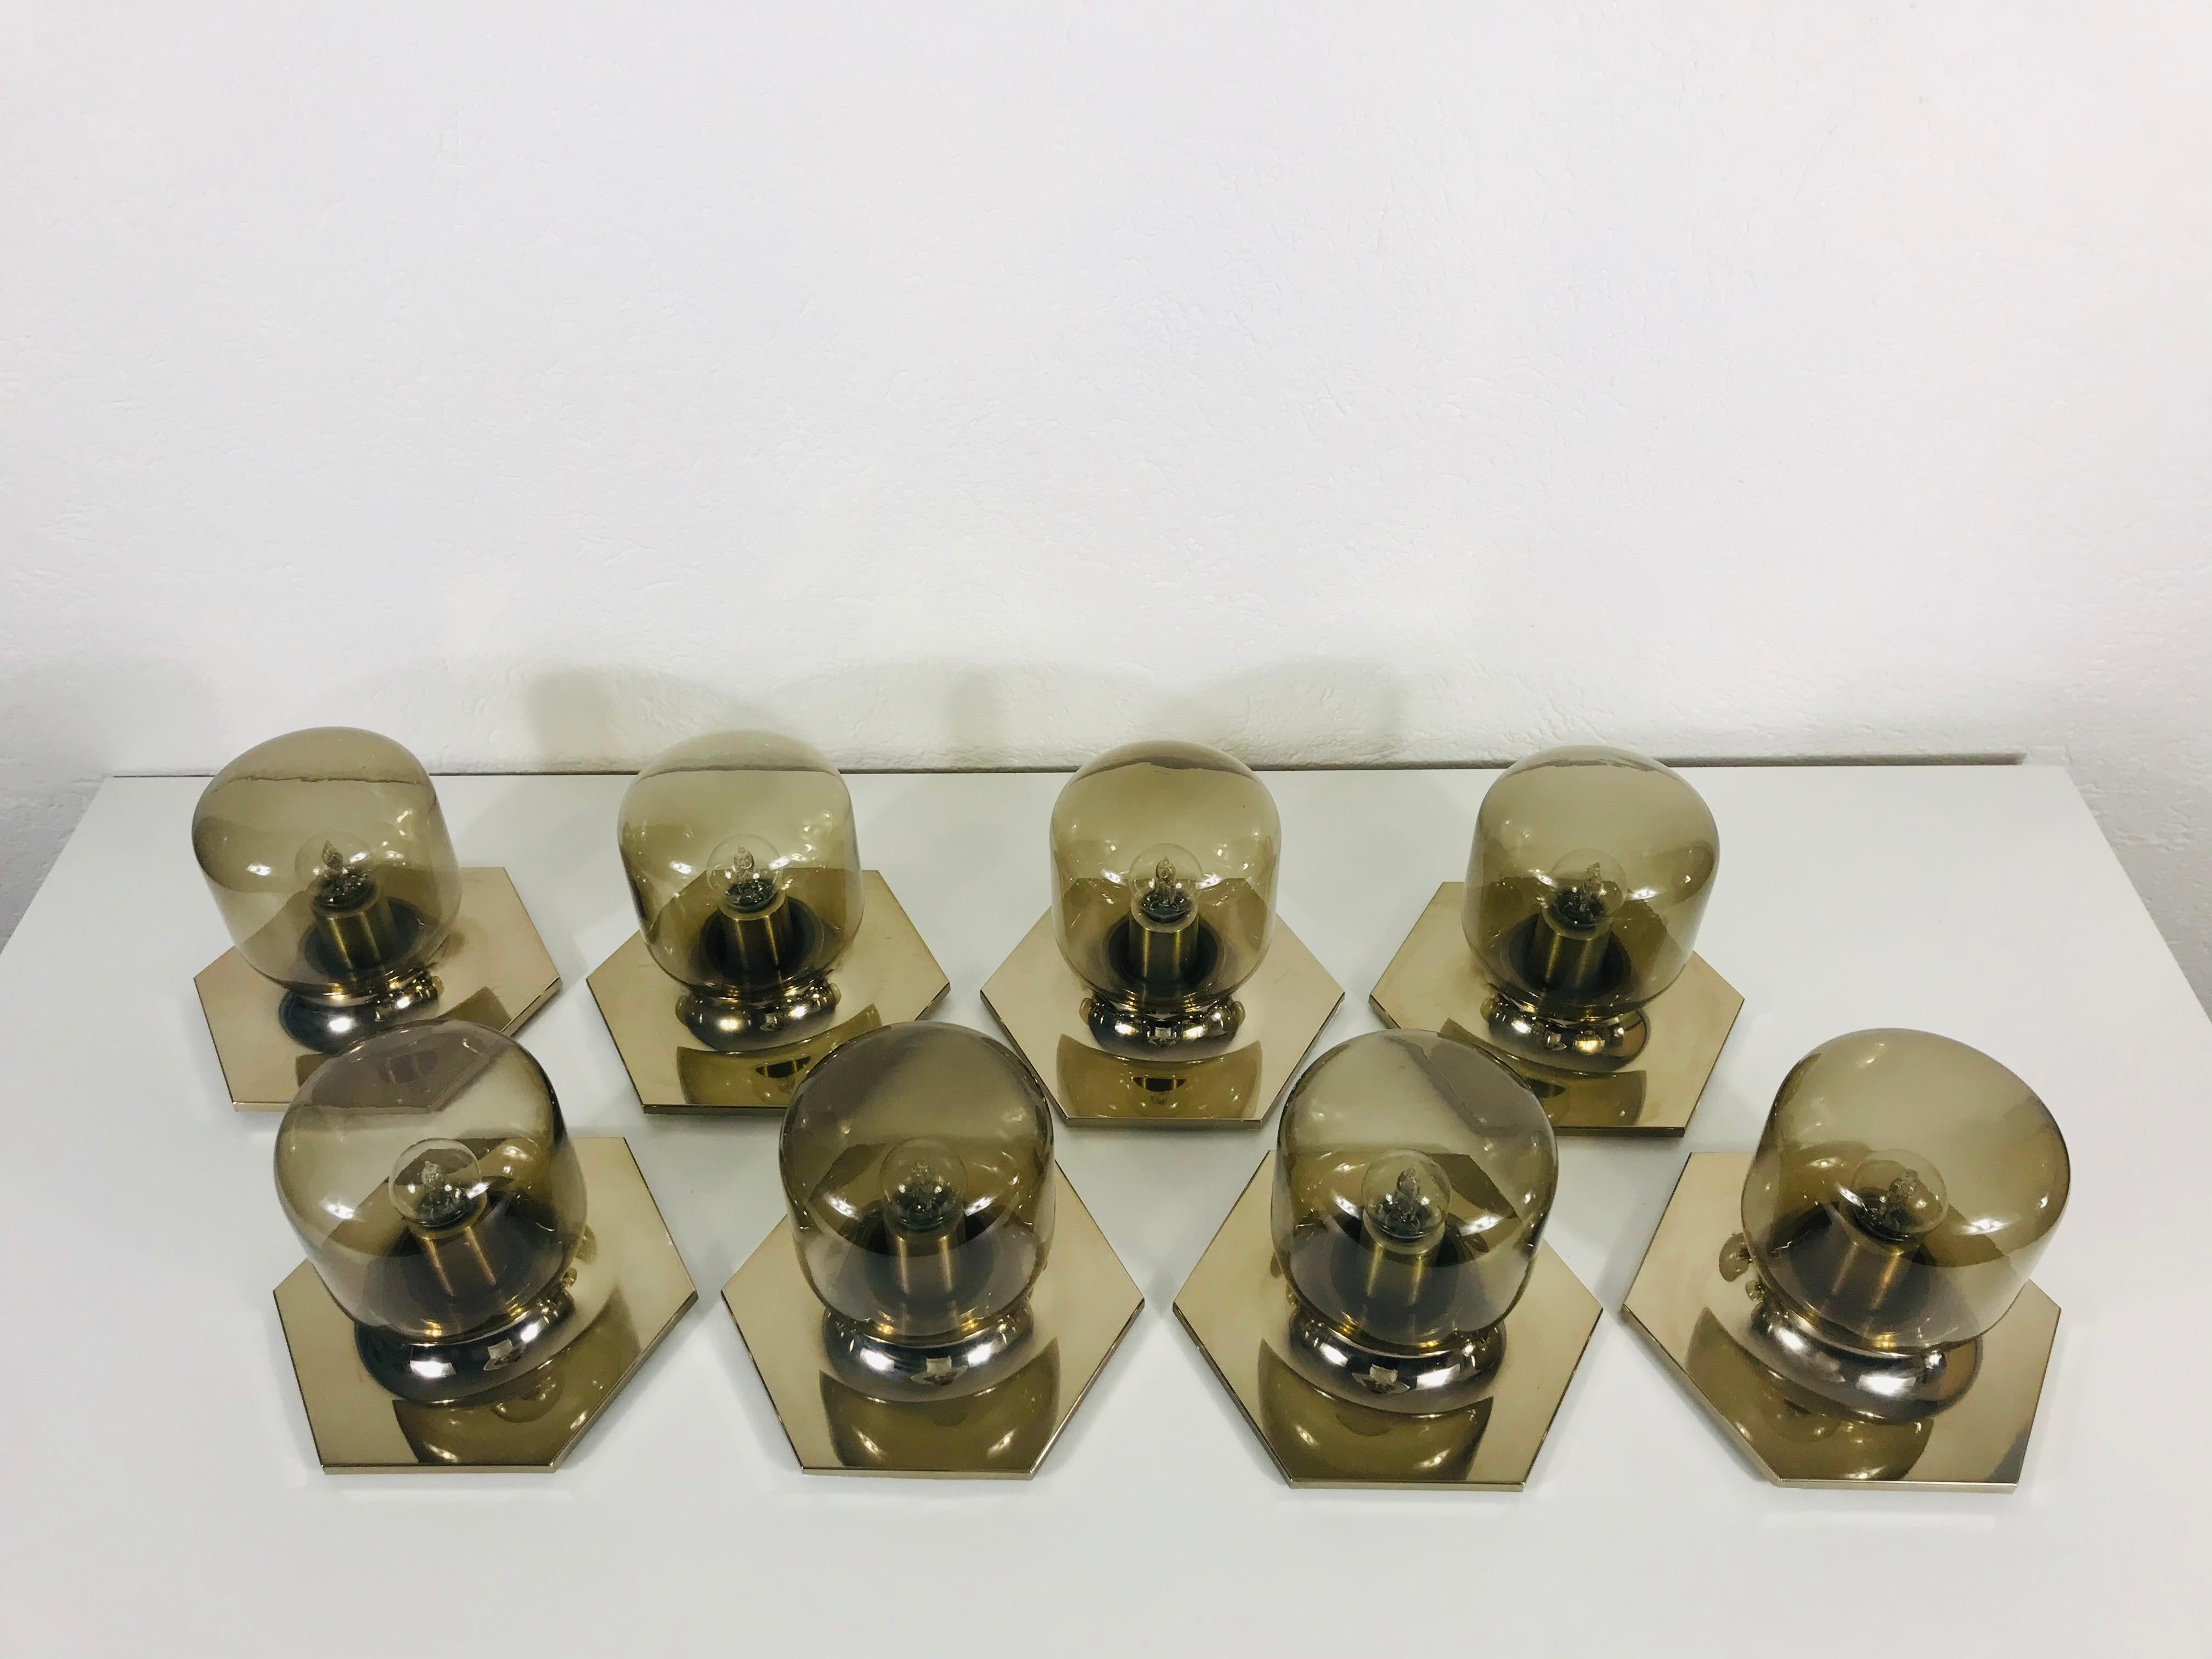 A wonderful set of 8 wall or ceiling lights by the Japanese designer Motoko Ishii for the German brand Staff Leuchten. They have a very thin amber glass shade and a brass base.